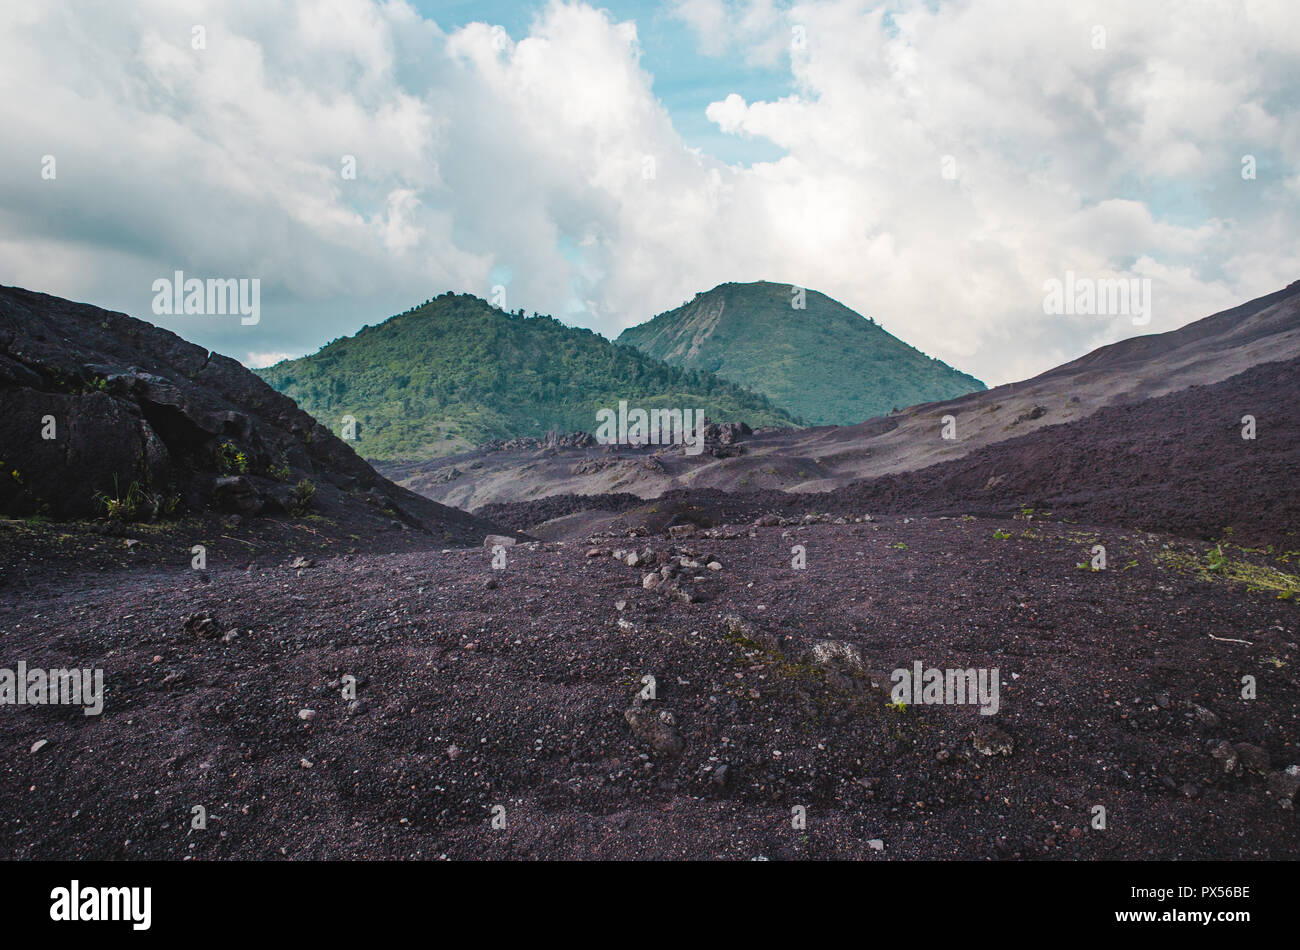 Changing landscapes around the Volcan Pacaya, one of Guatemala's most active volcanoes, from black volcanic rock to lush green forests Stock Photo